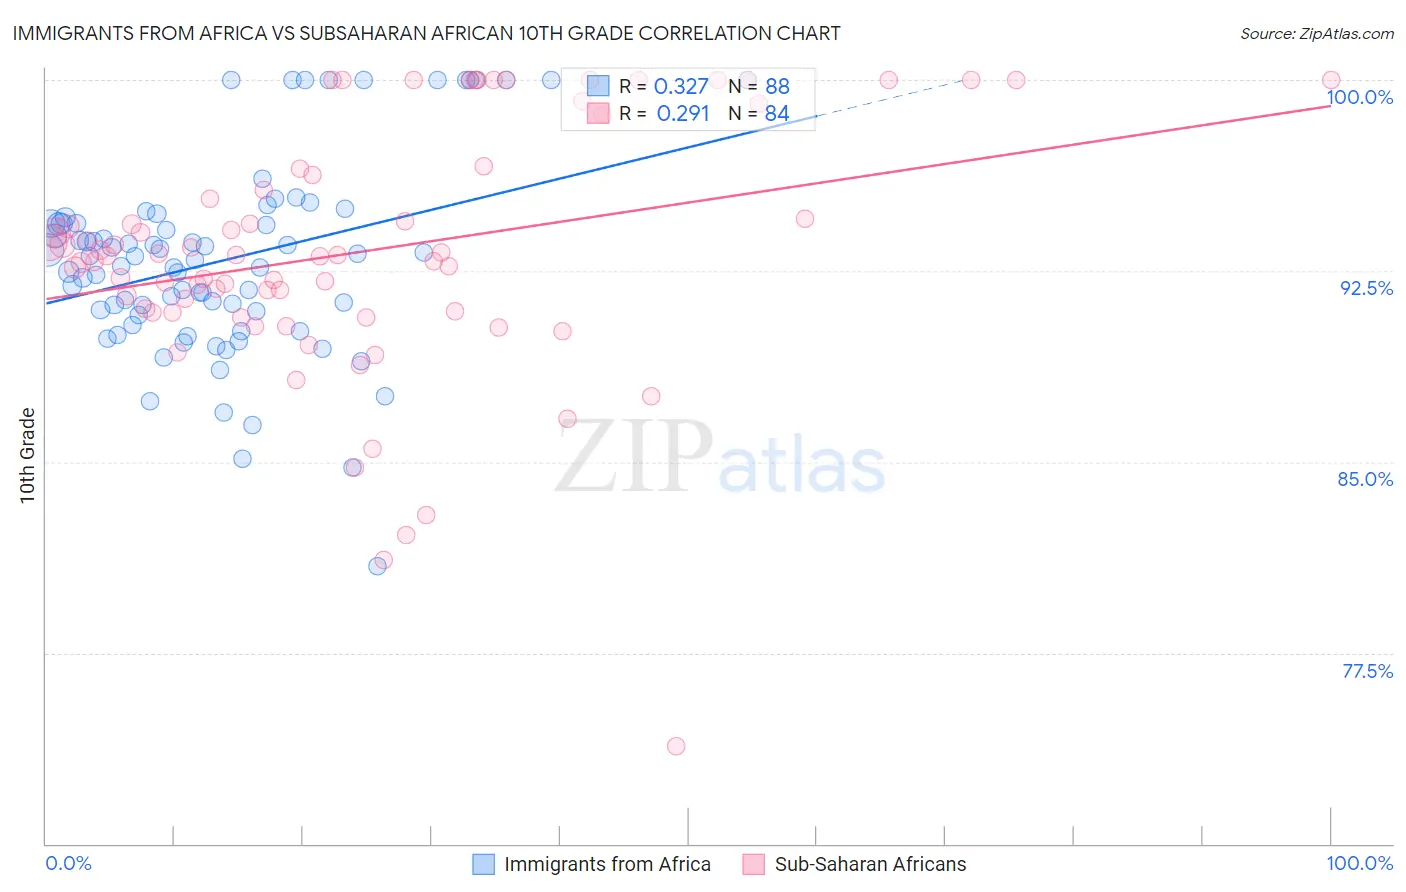 Immigrants from Africa vs Subsaharan African 10th Grade